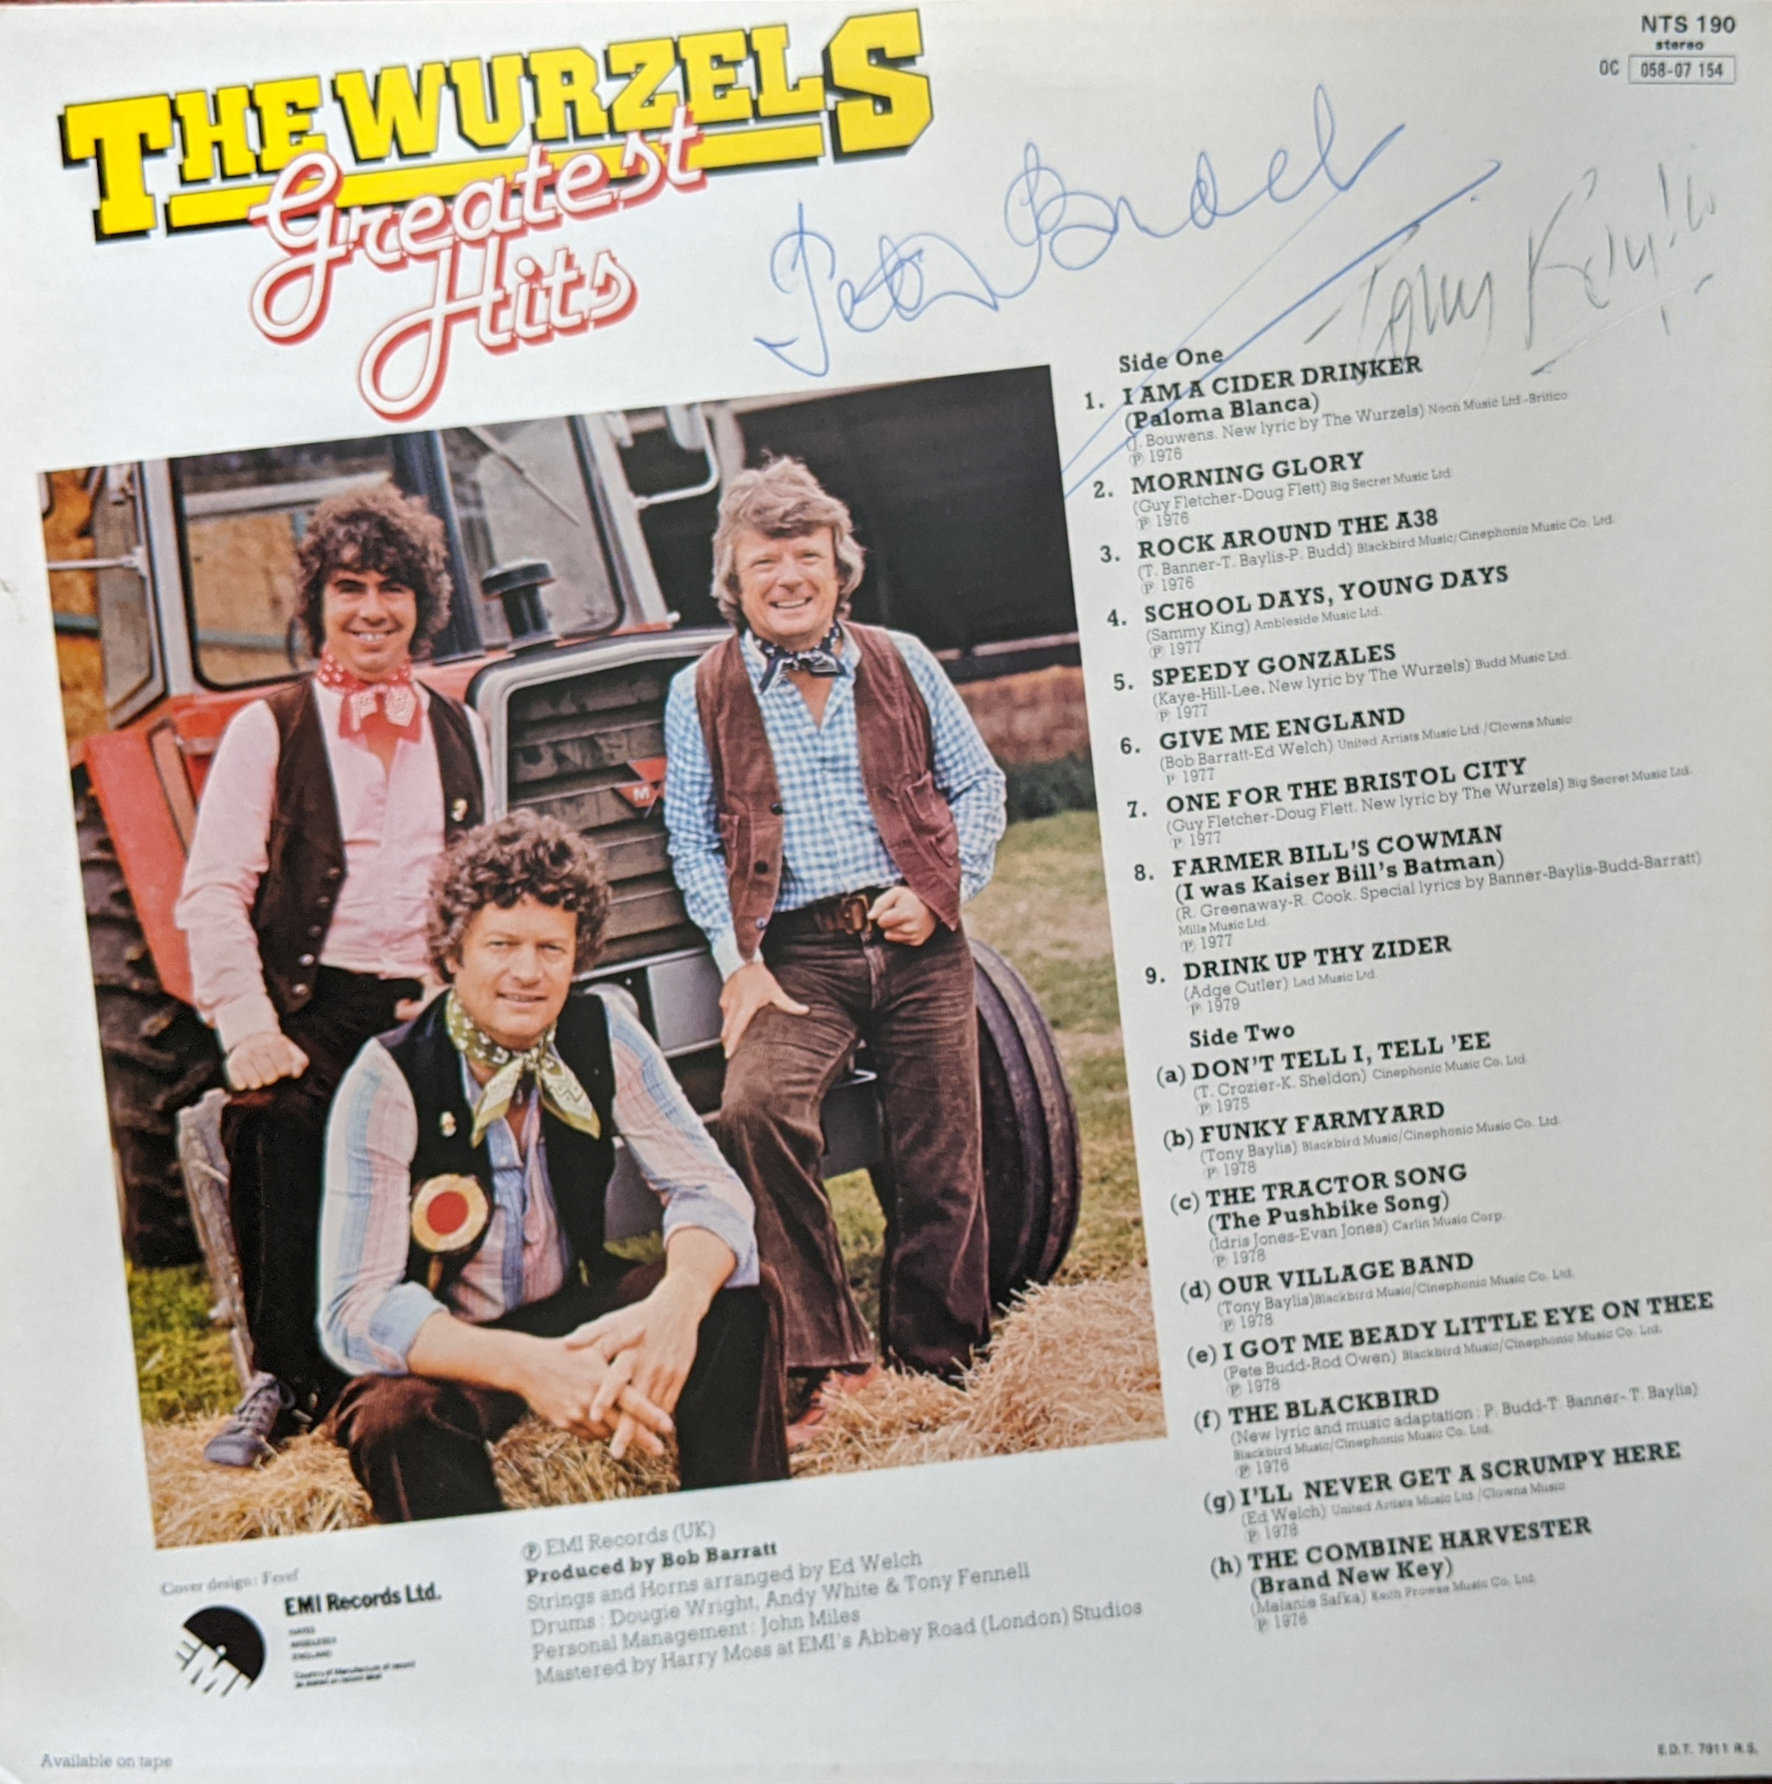 The Wurzels Archives